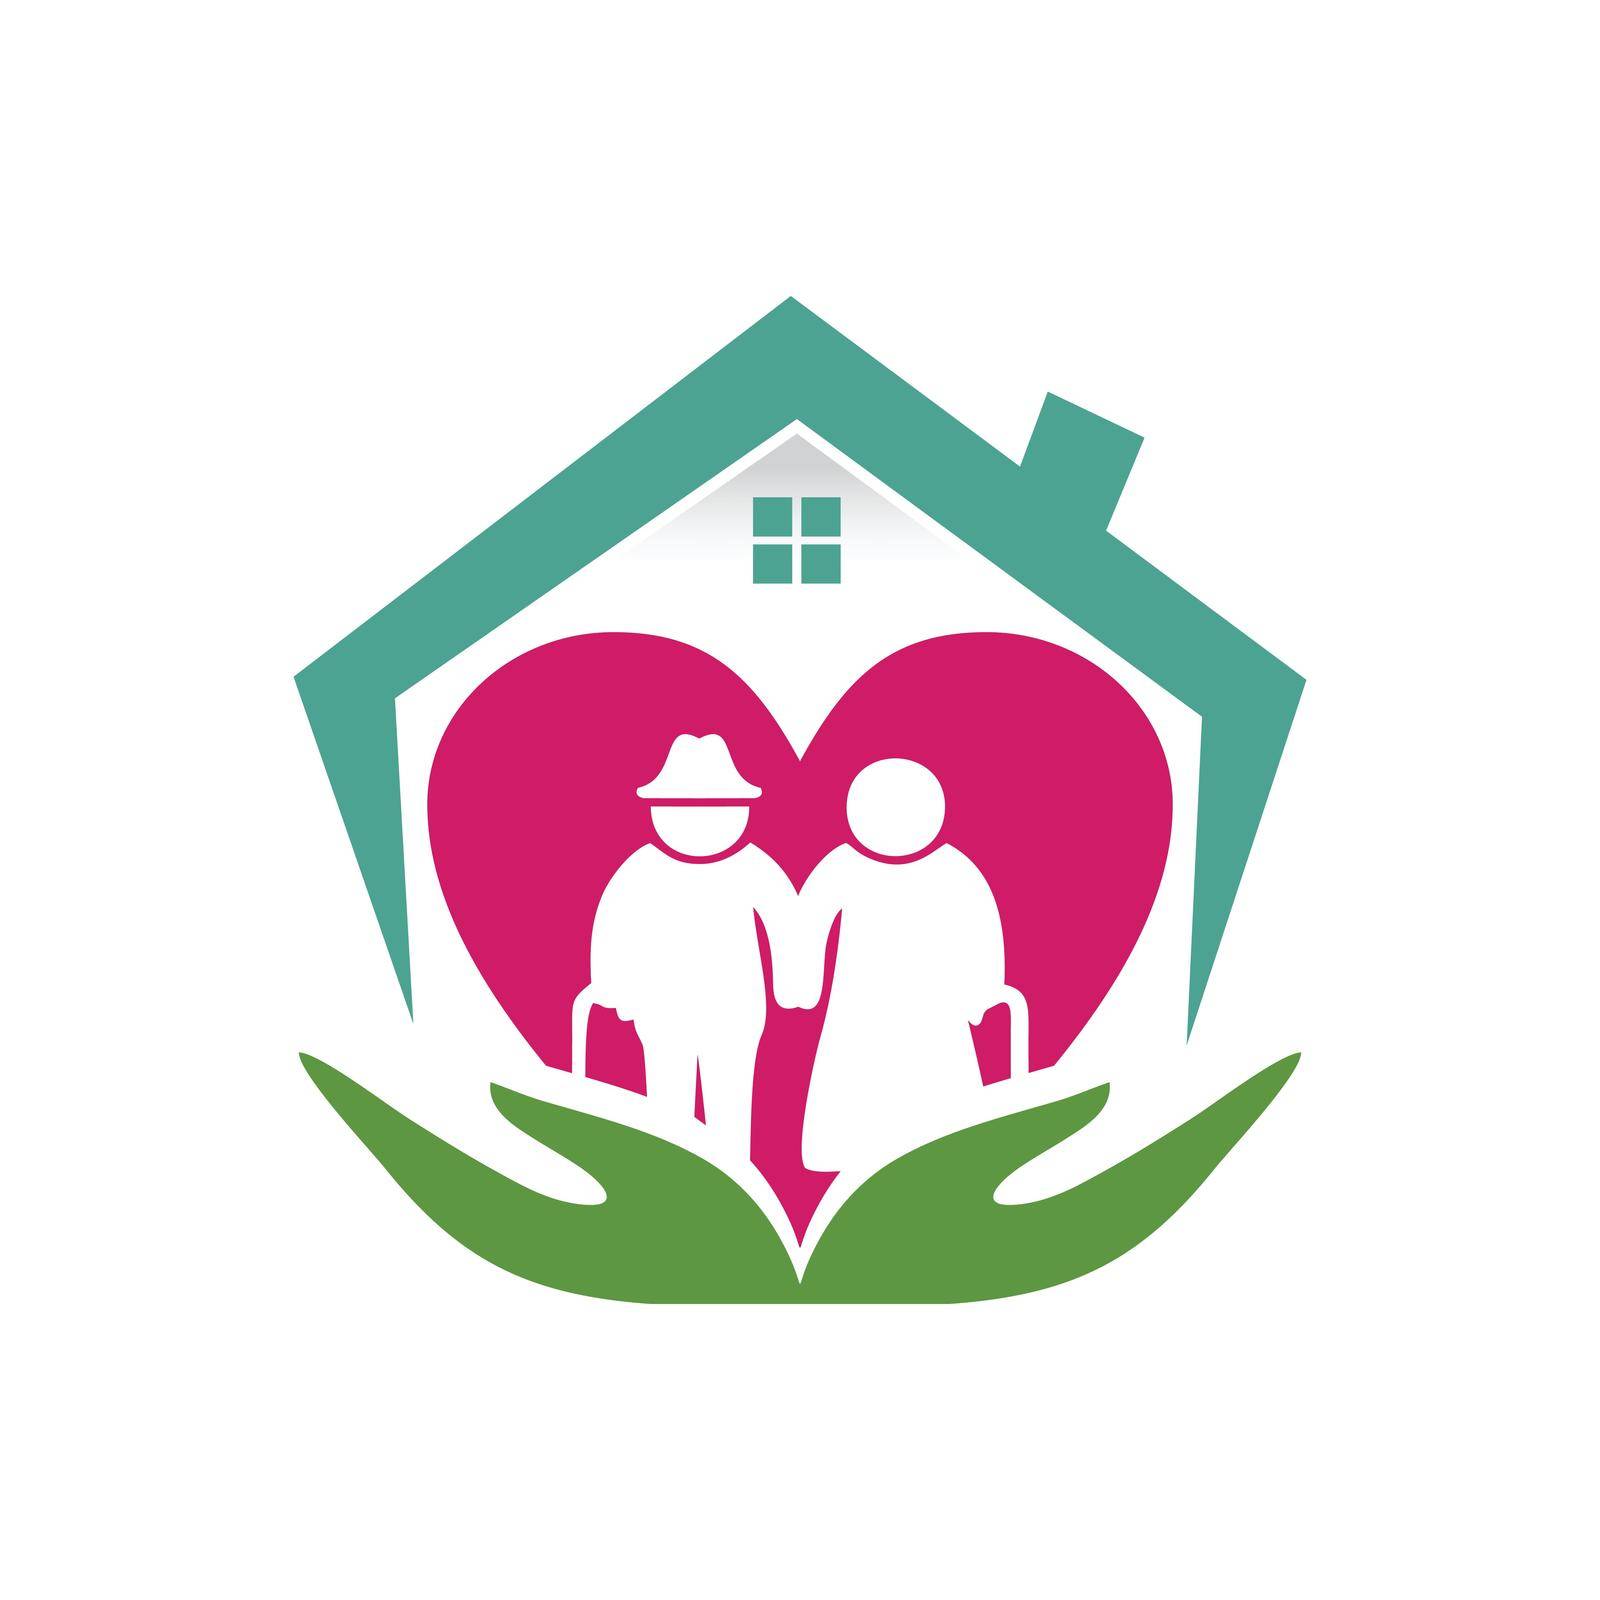 A vecrtor illustration of home care love and clean logo